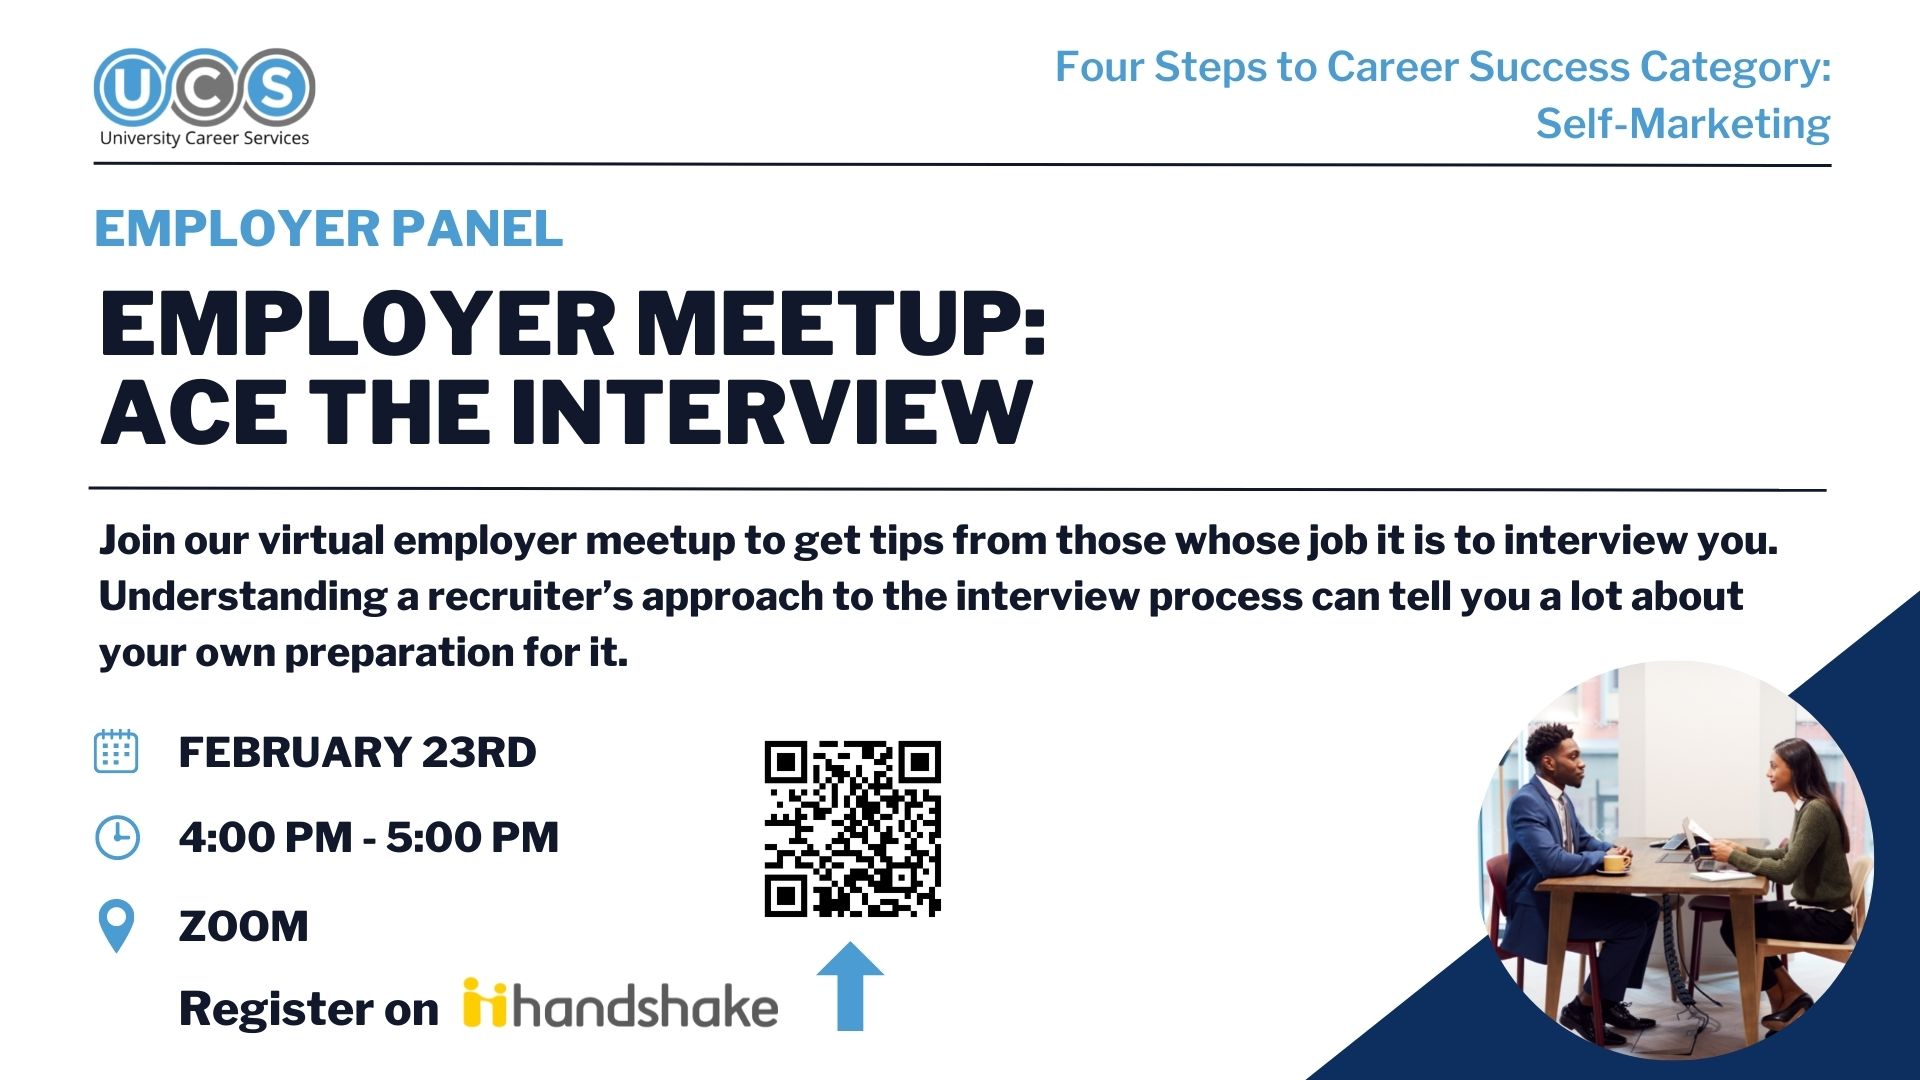 Join our virtual employer meetup to get tips from those whose job it is to interview you. Understanding a recruiter’s approach to the interview process can tell you a lot about your own preparation for it. 